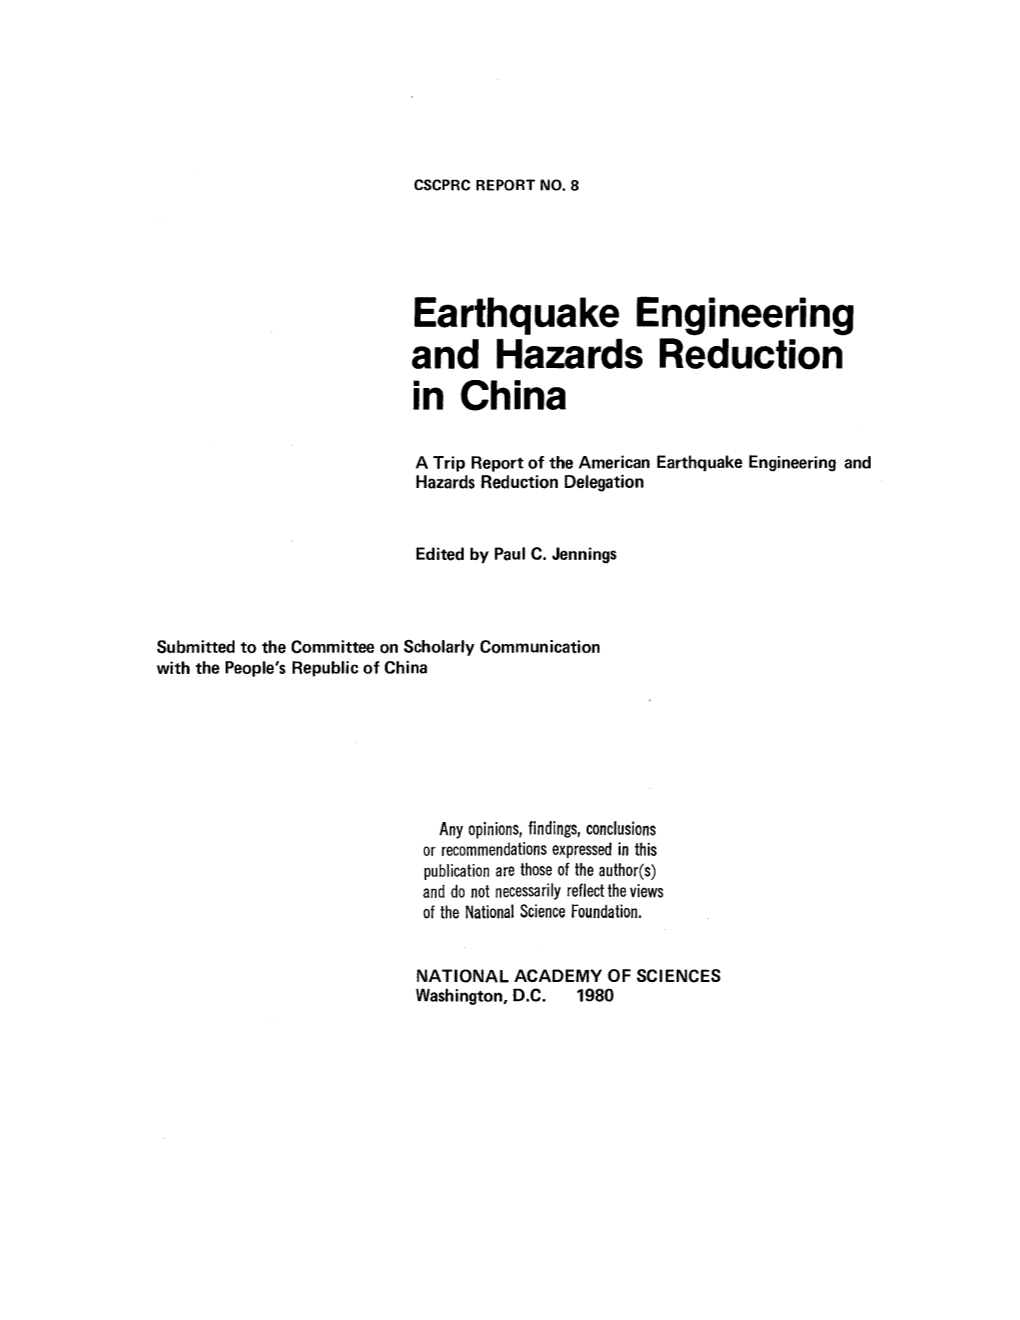 Earthquake Engineering and Hazards Reduction in China